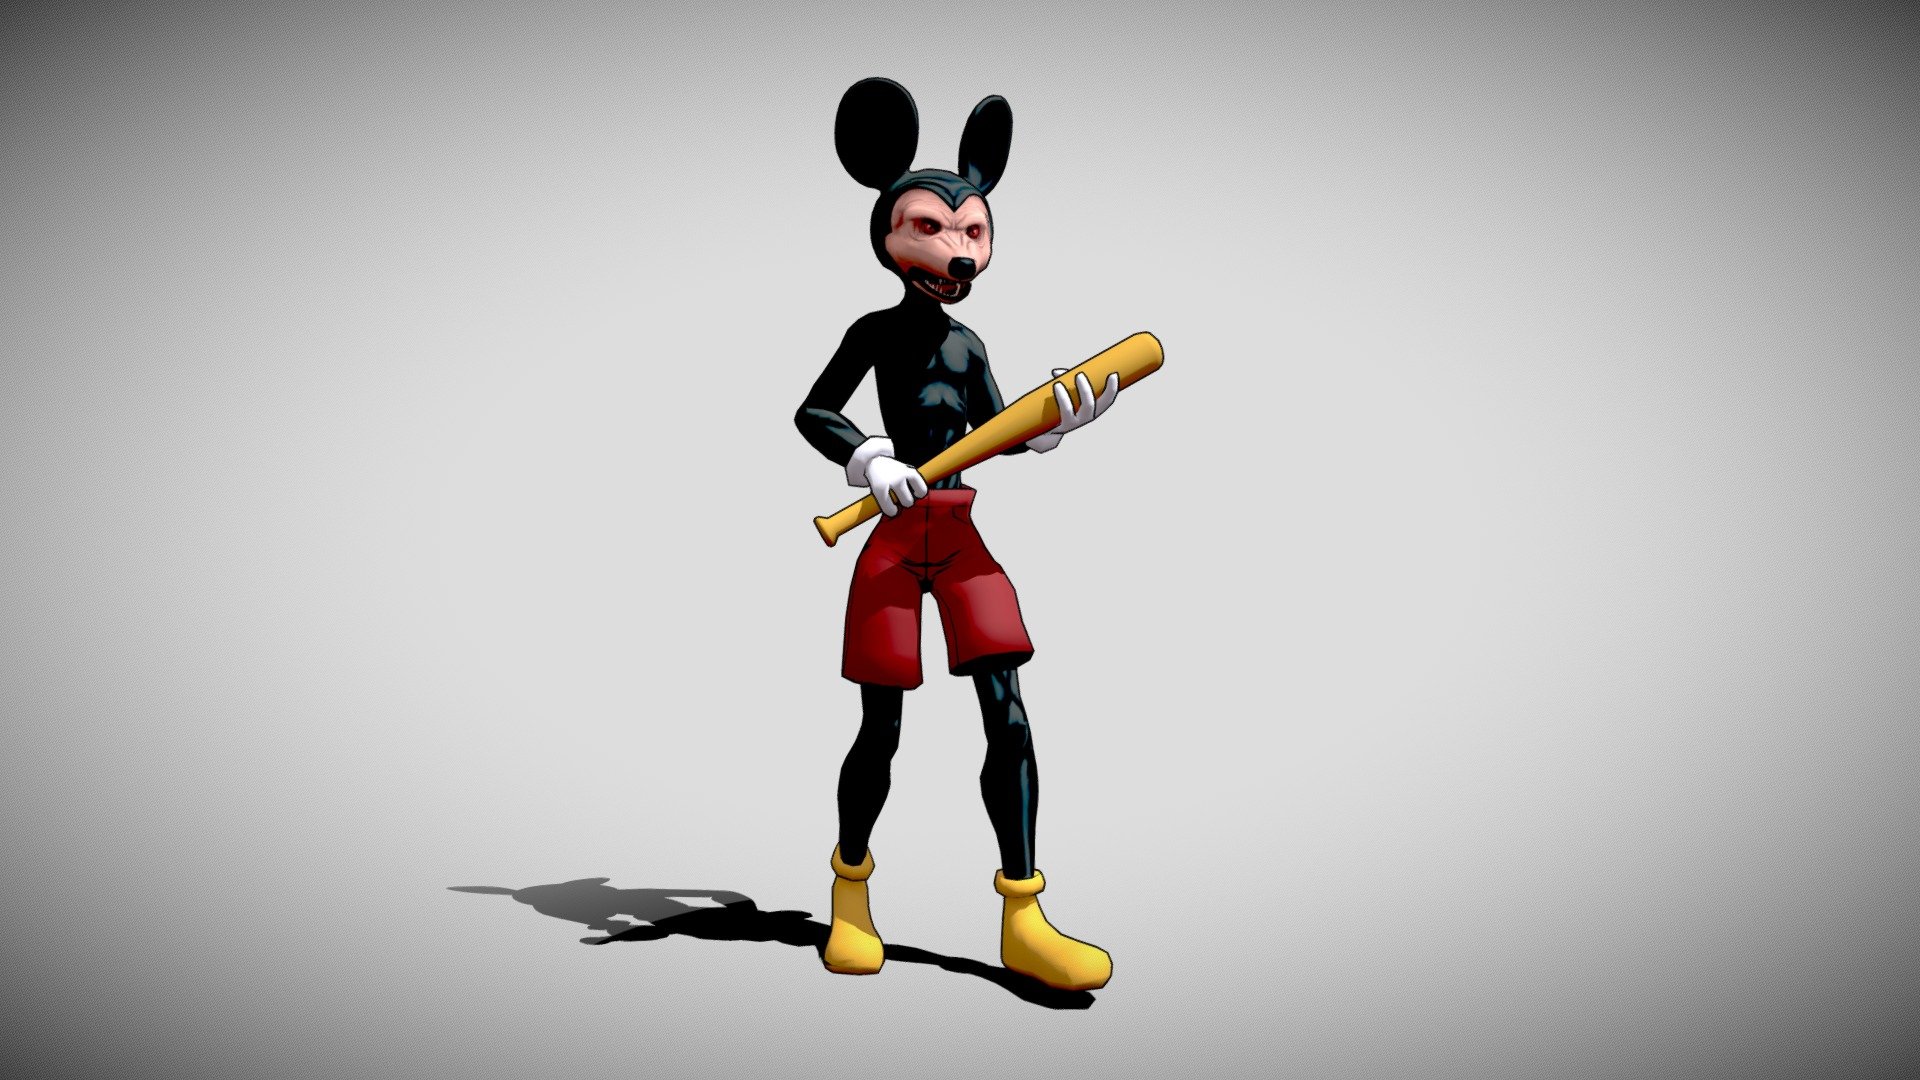 Model made in Blender, with soul and spirit from Deep Web and Chernobyl 

https://youtu.be/8nfqkJbRi08

My page on Facebook

My chanel on Youtube

My Artstation

To 3D Characters models commission - boskonovit@gmail.com - Mickey Mouse - Buy Royalty Free 3D model by Pedro Galvão (@boskonovit) 3d model